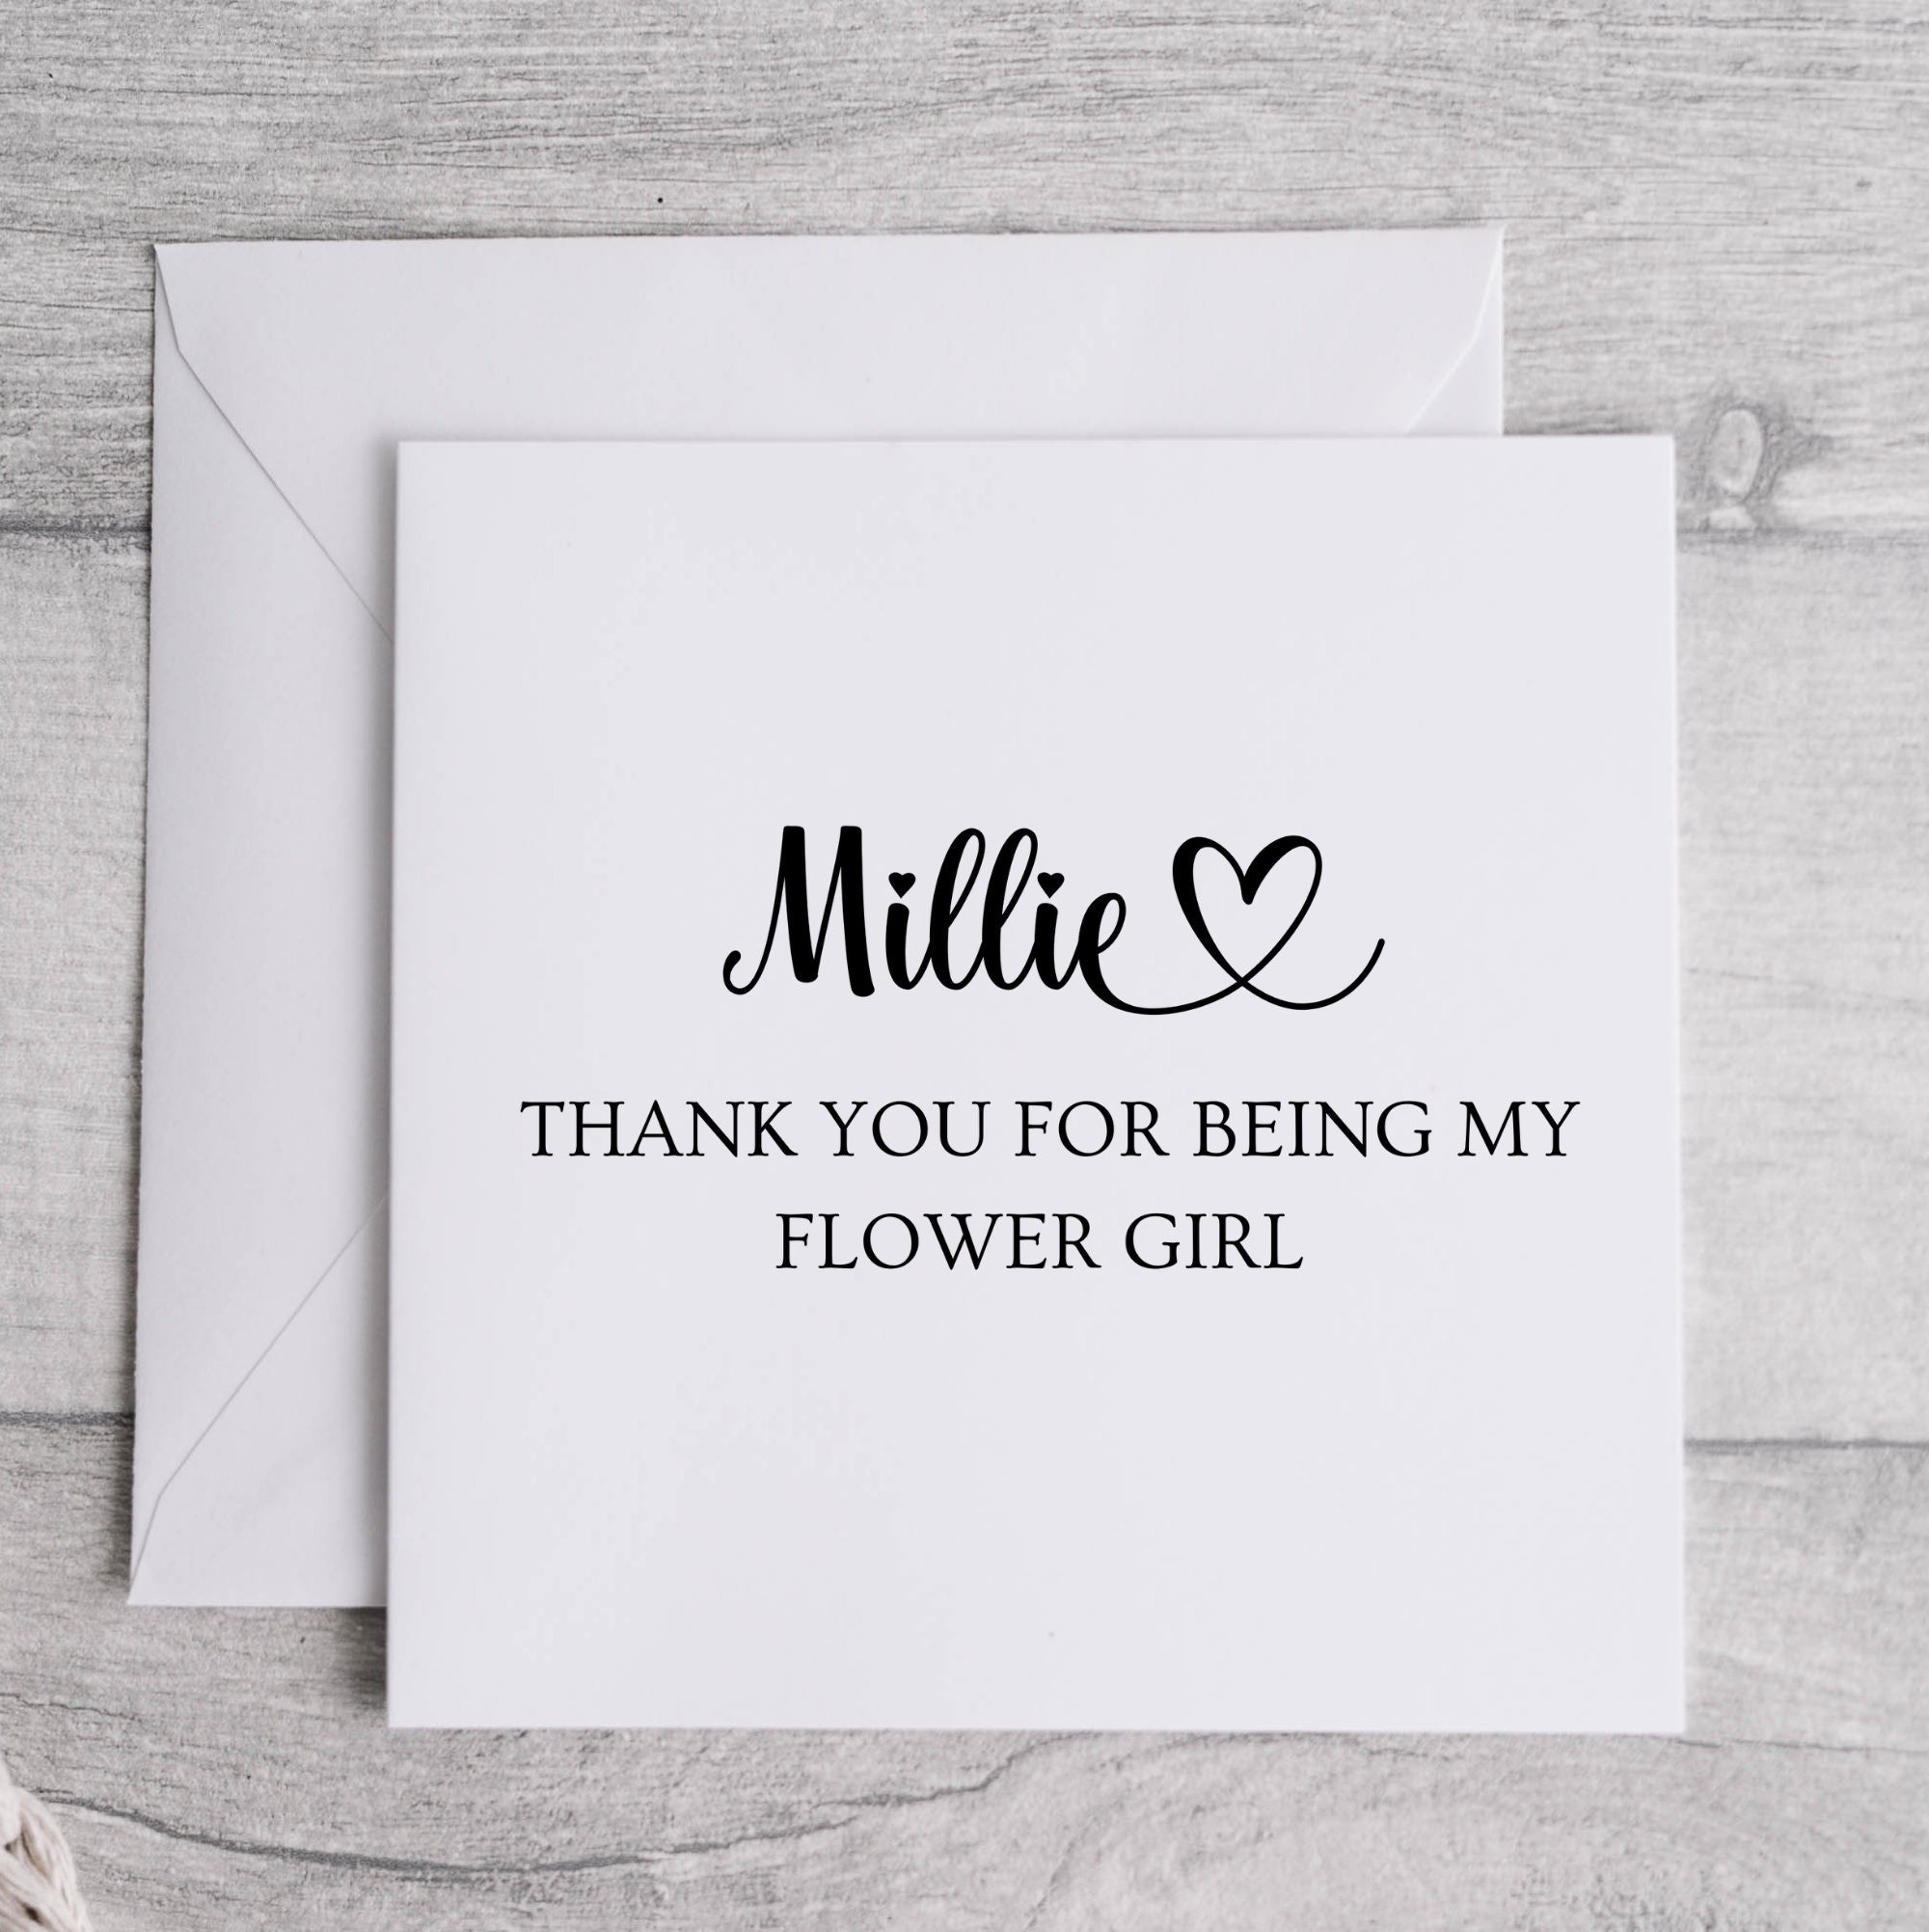 Thank you for Being My Bridesmaid-Maid of Honour-Chief Bridesmaid Wedding Card 